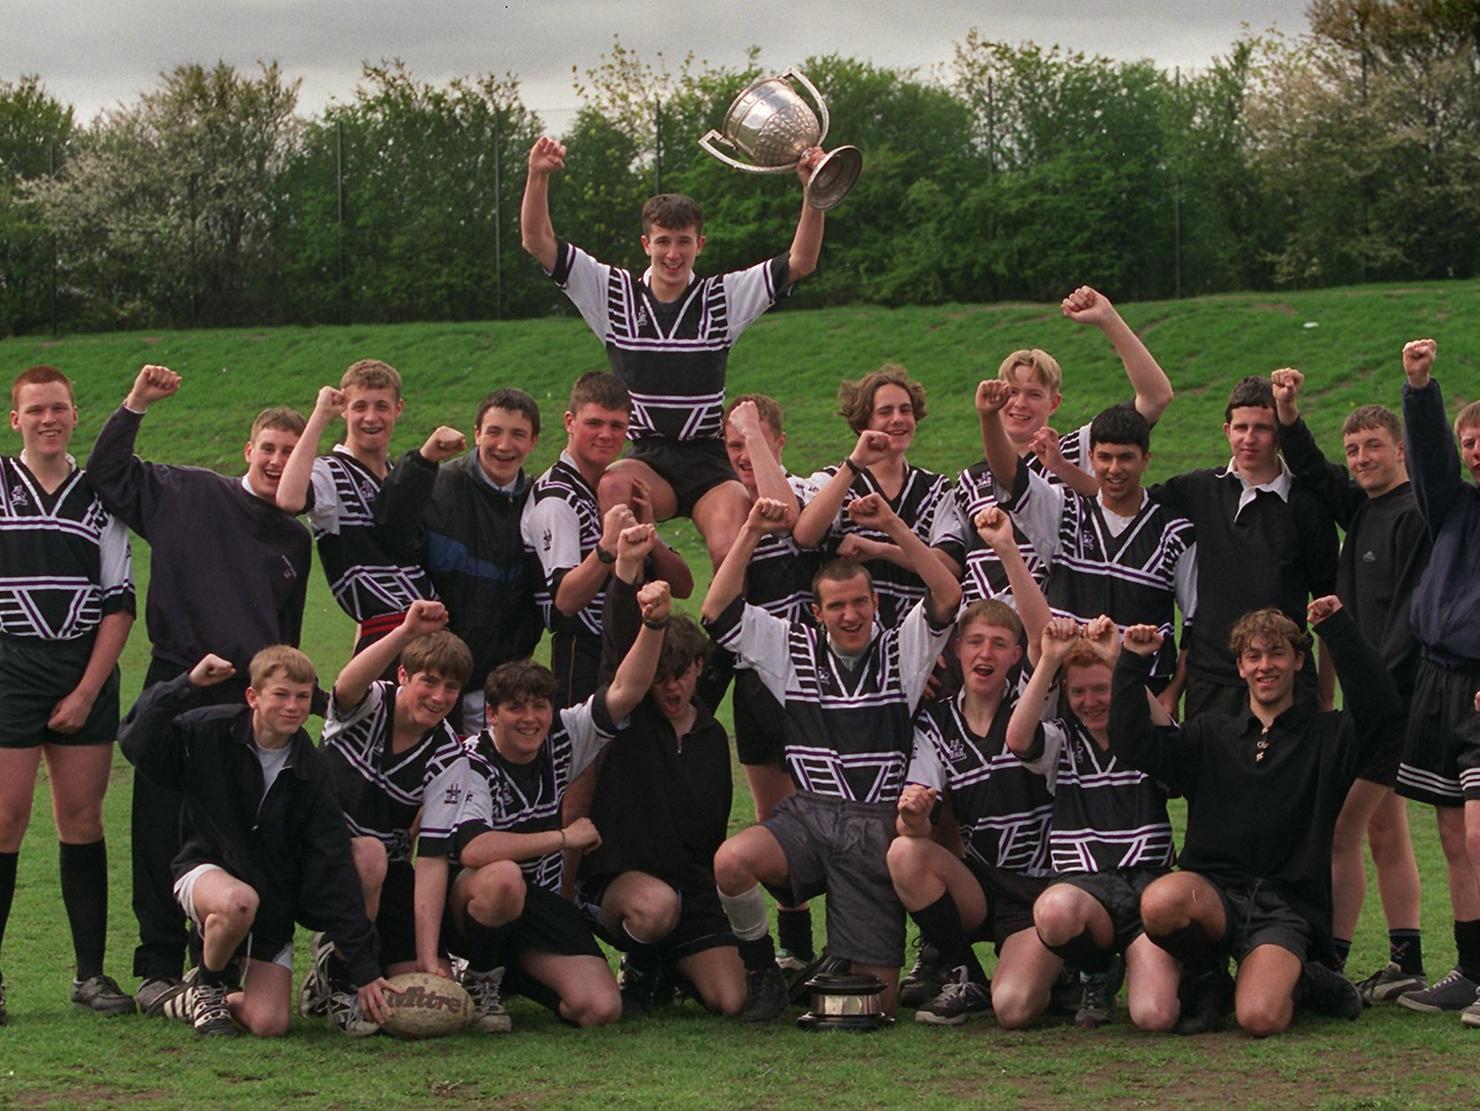 The rugby team at Matthew Murray which won the under 16's Leeds Cup. The team did not win a match for three years or even score a try for two.